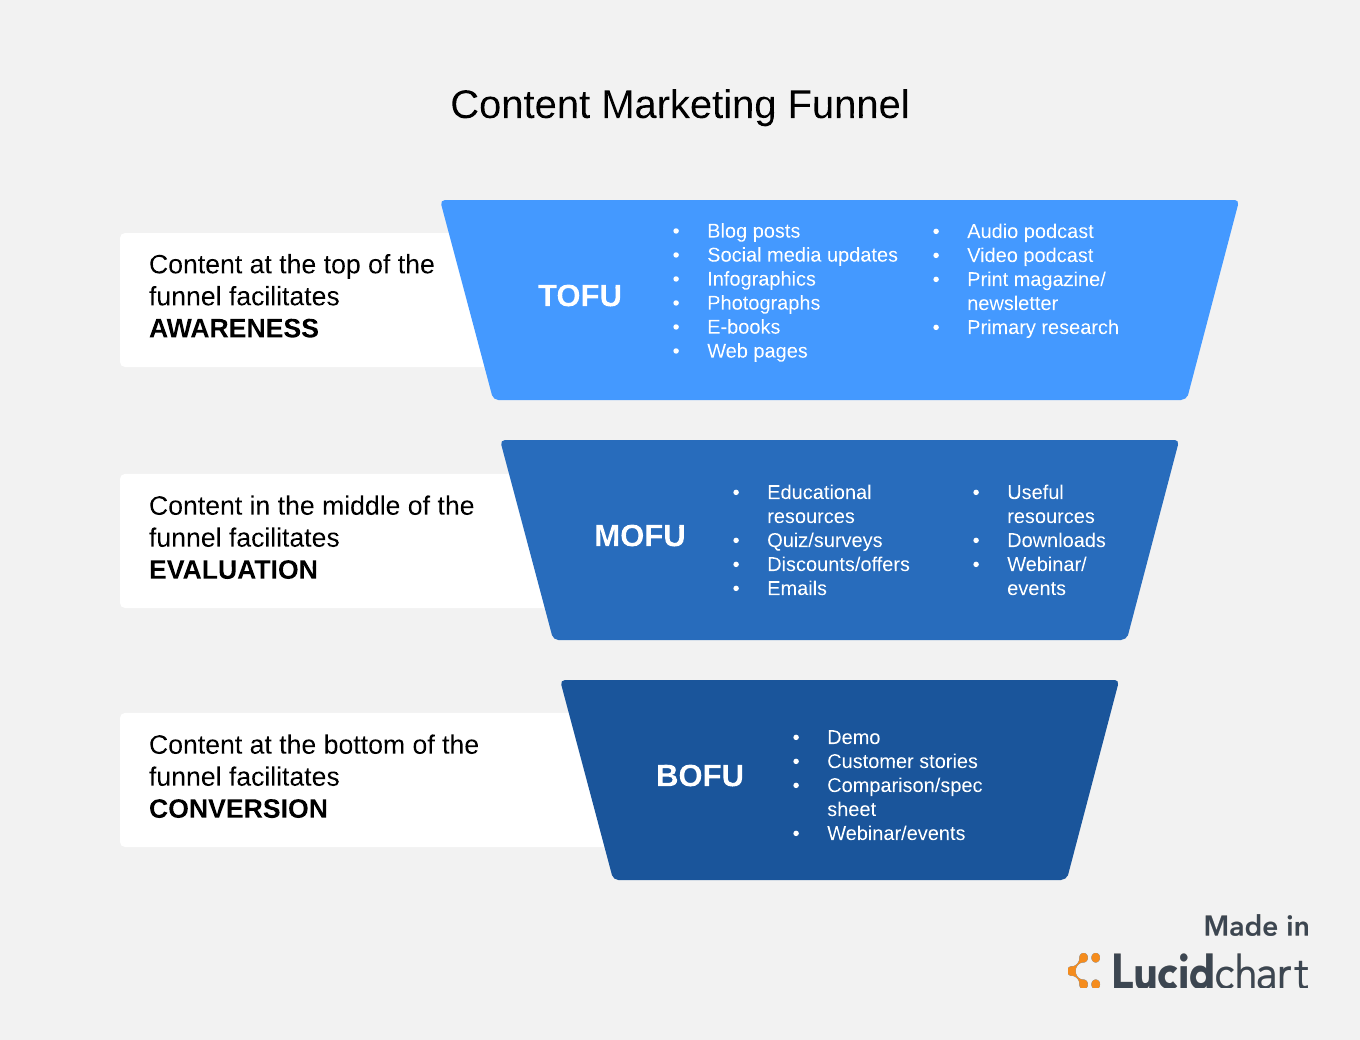 Content needs differ across various stages of the content funnel.